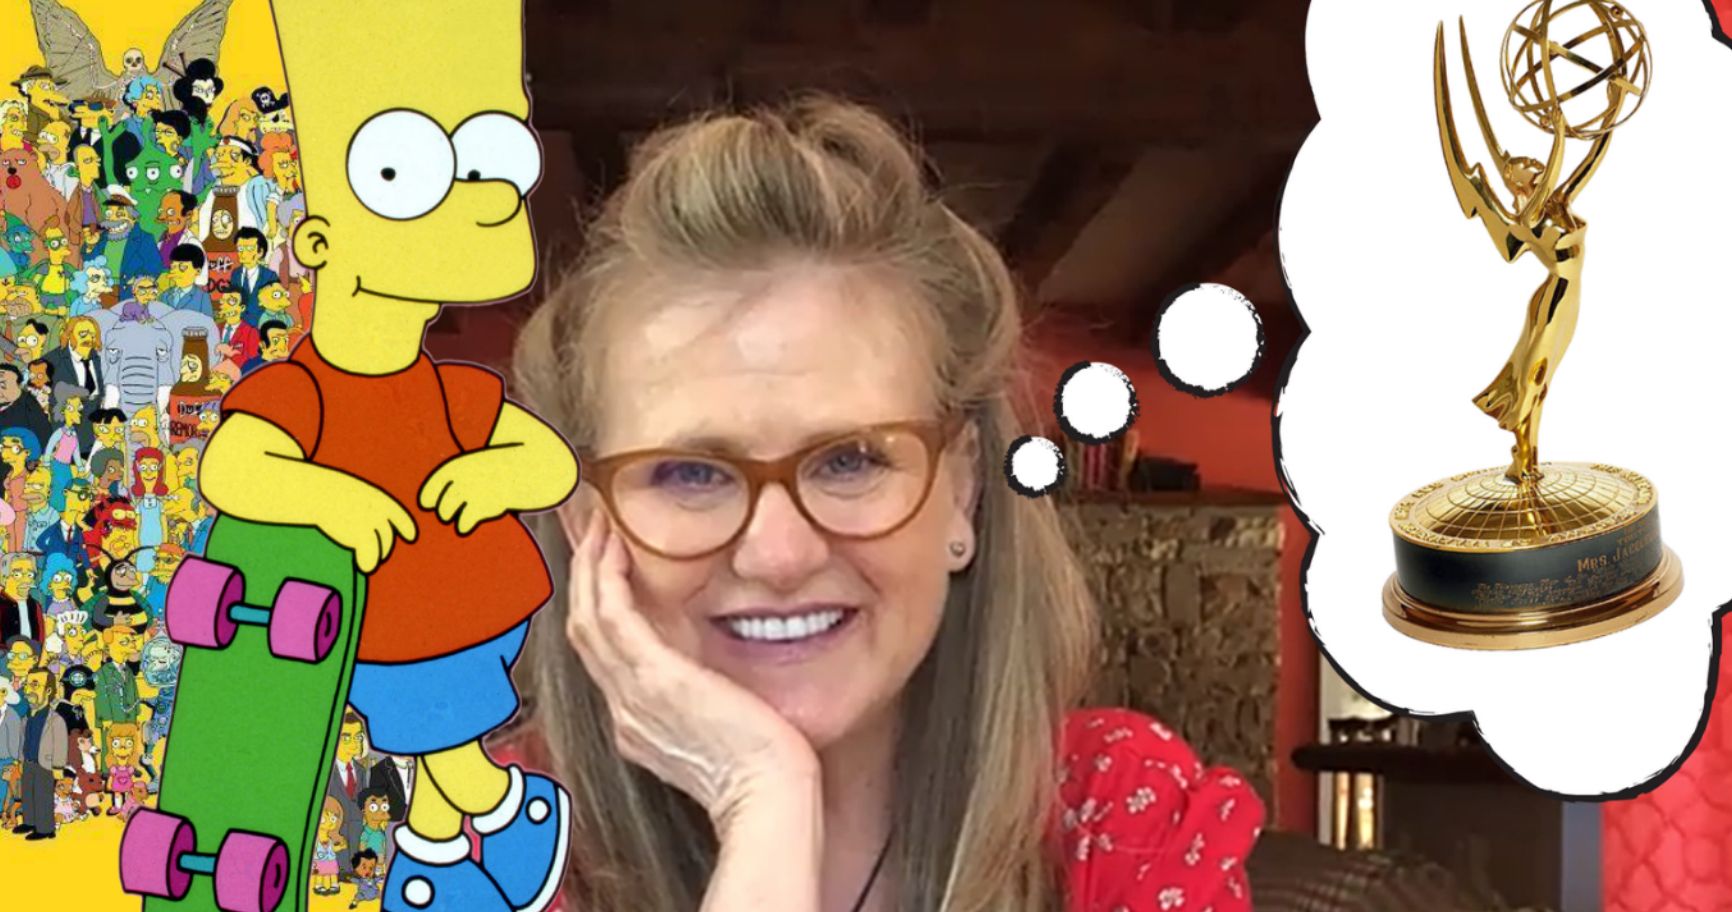 The Simpsons Star Dreams of Winning Second Emmy Nearly 30 Years After First Win